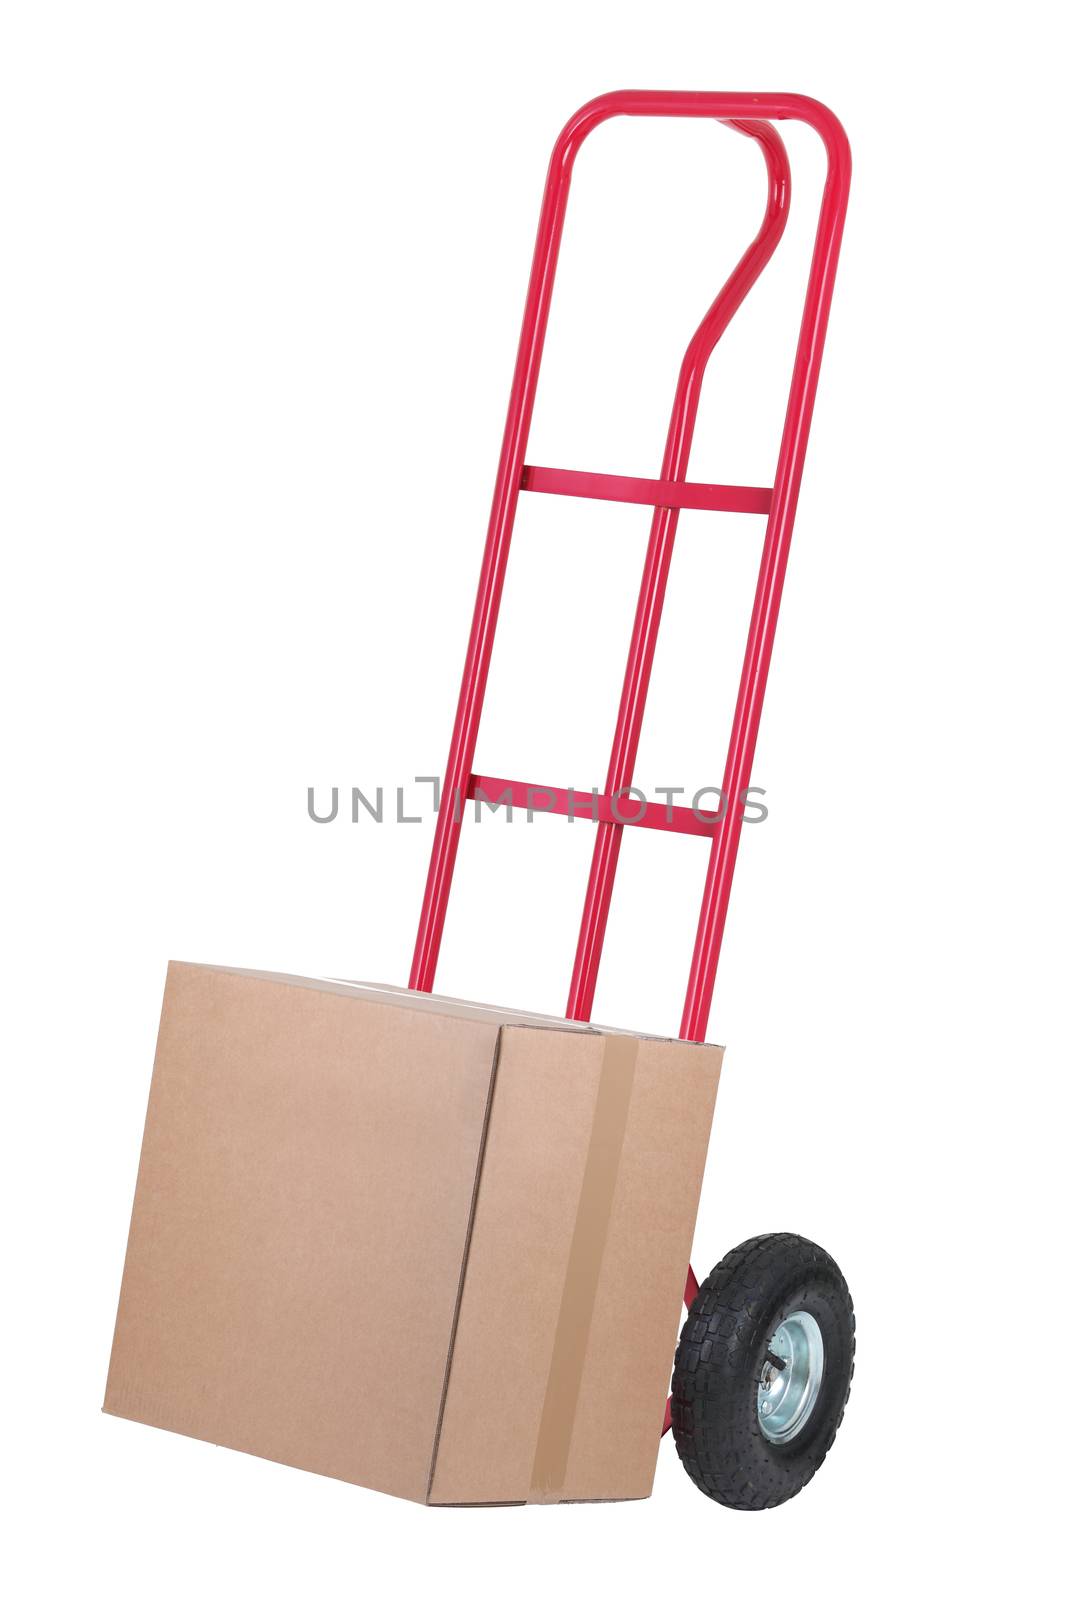 A trolley sack barrow with parcel for delivery